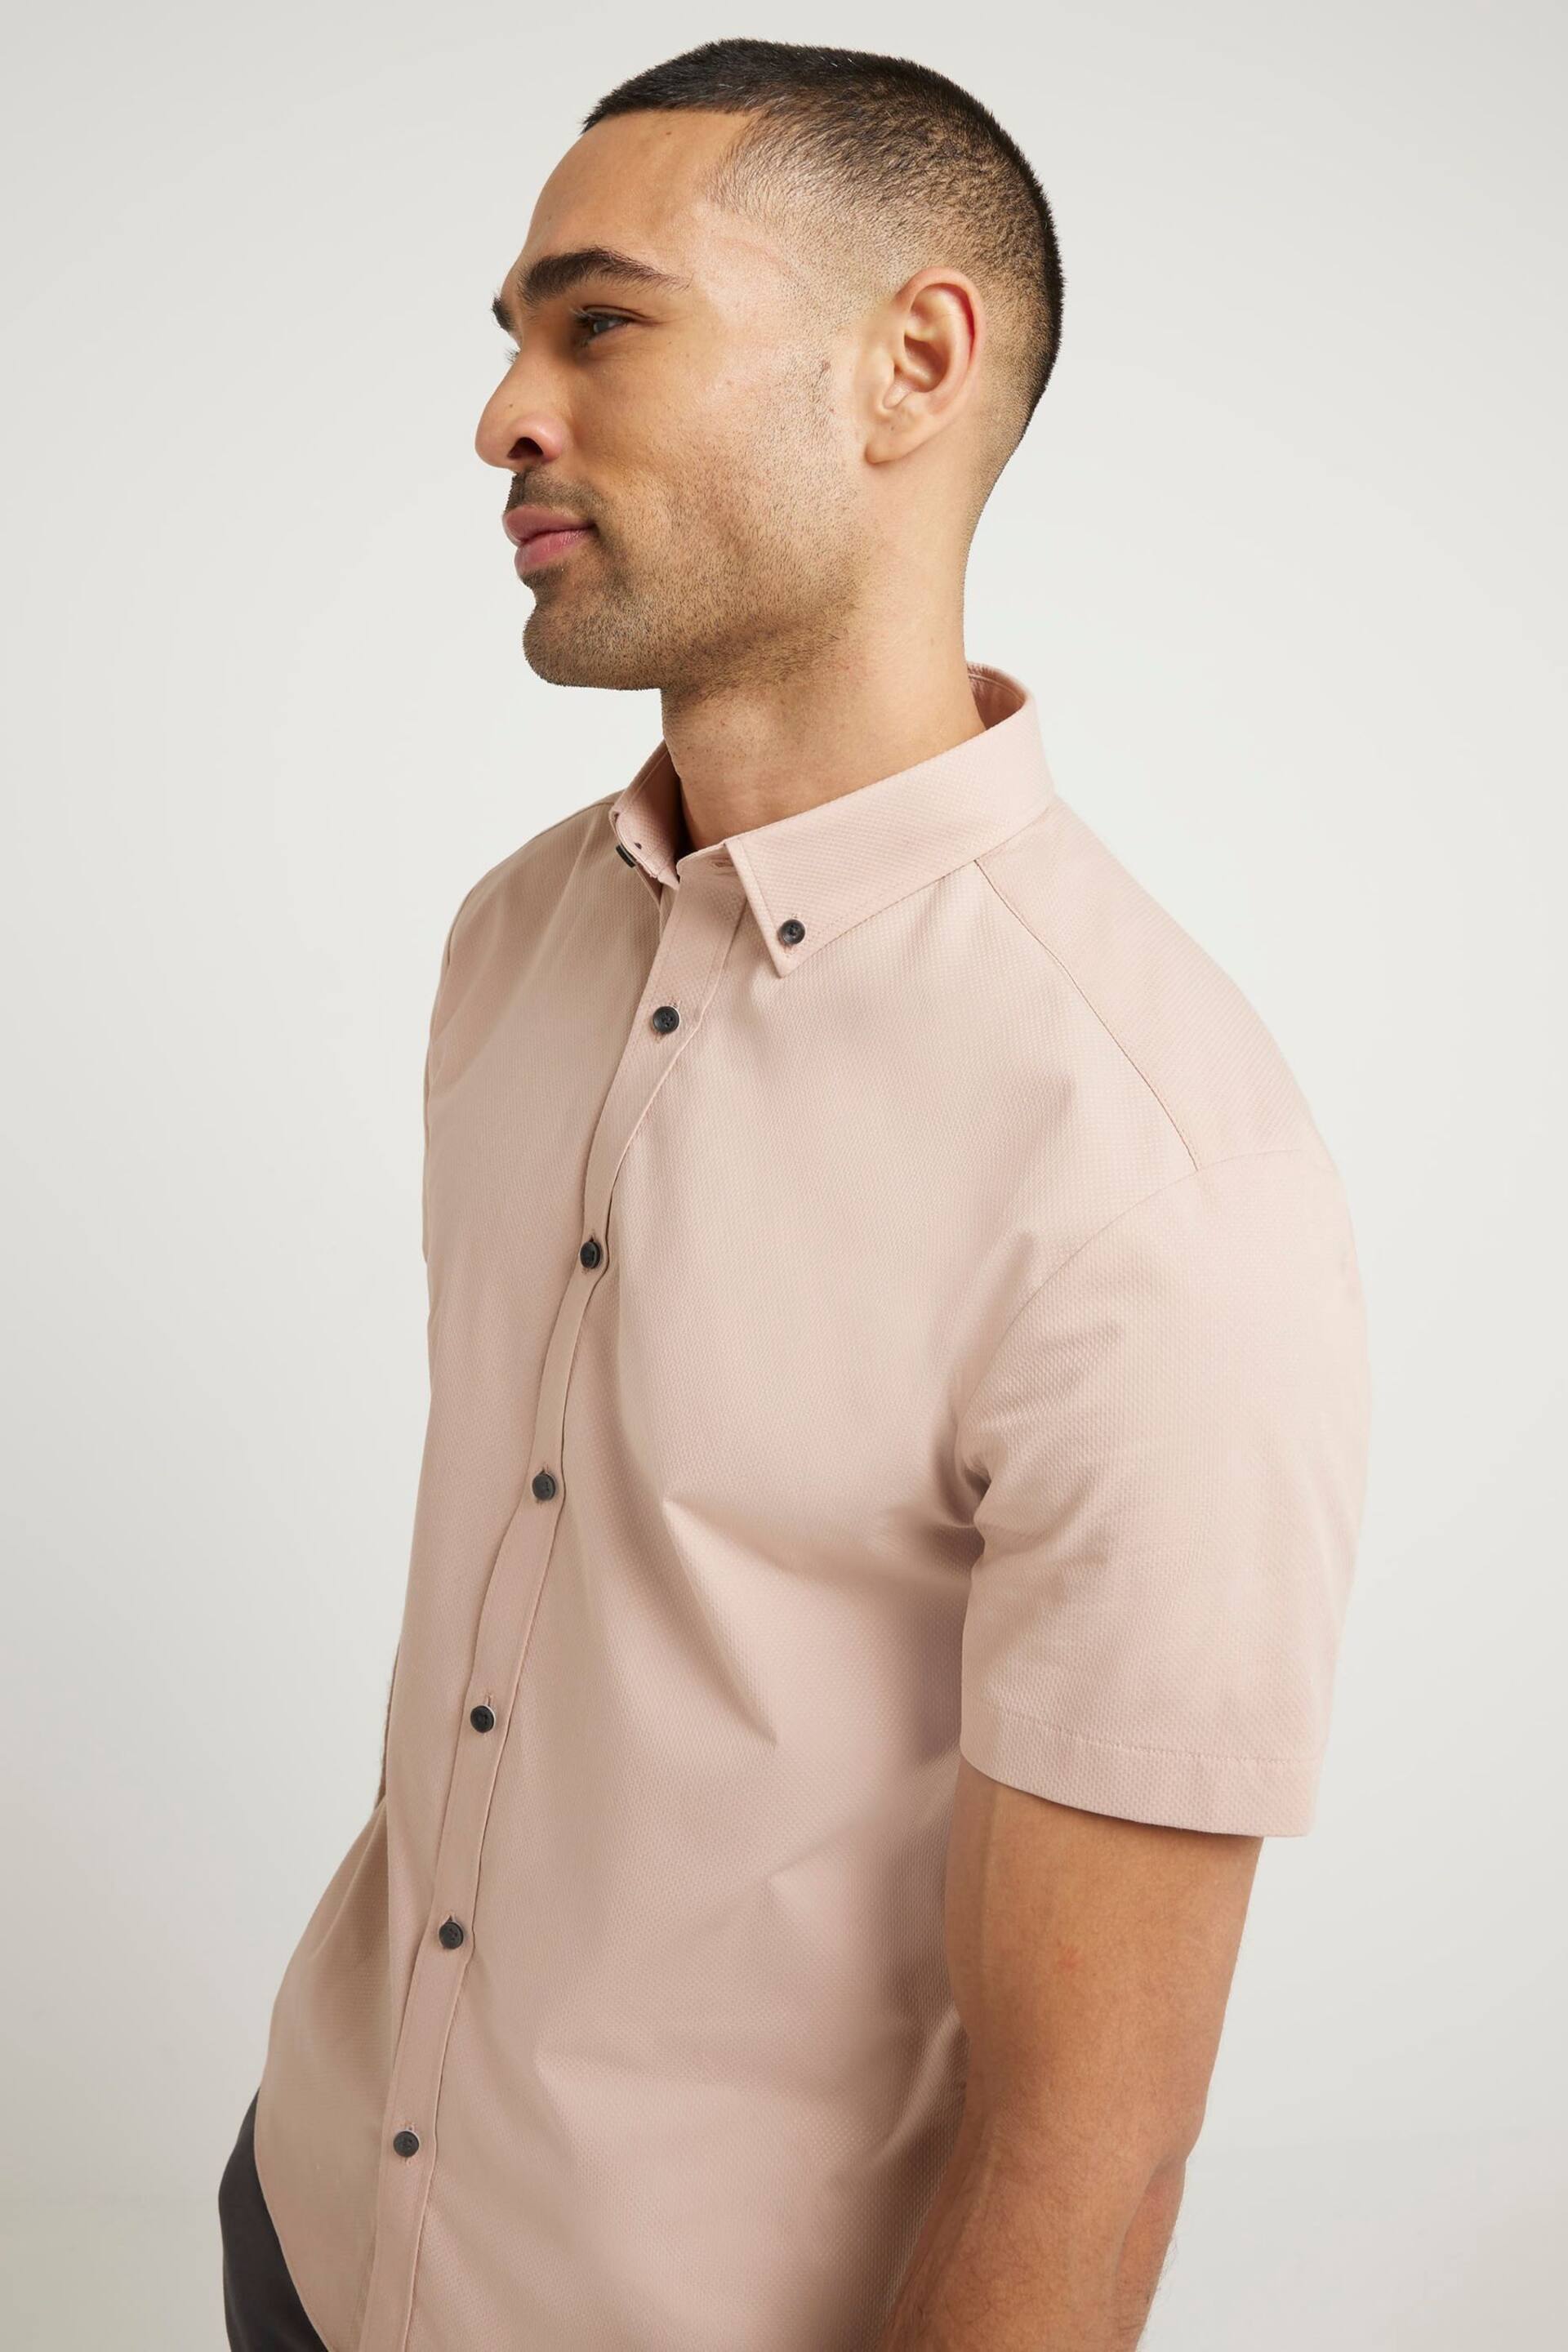 River Island Pink Muscle Fit Textured Shirt - Image 3 of 3